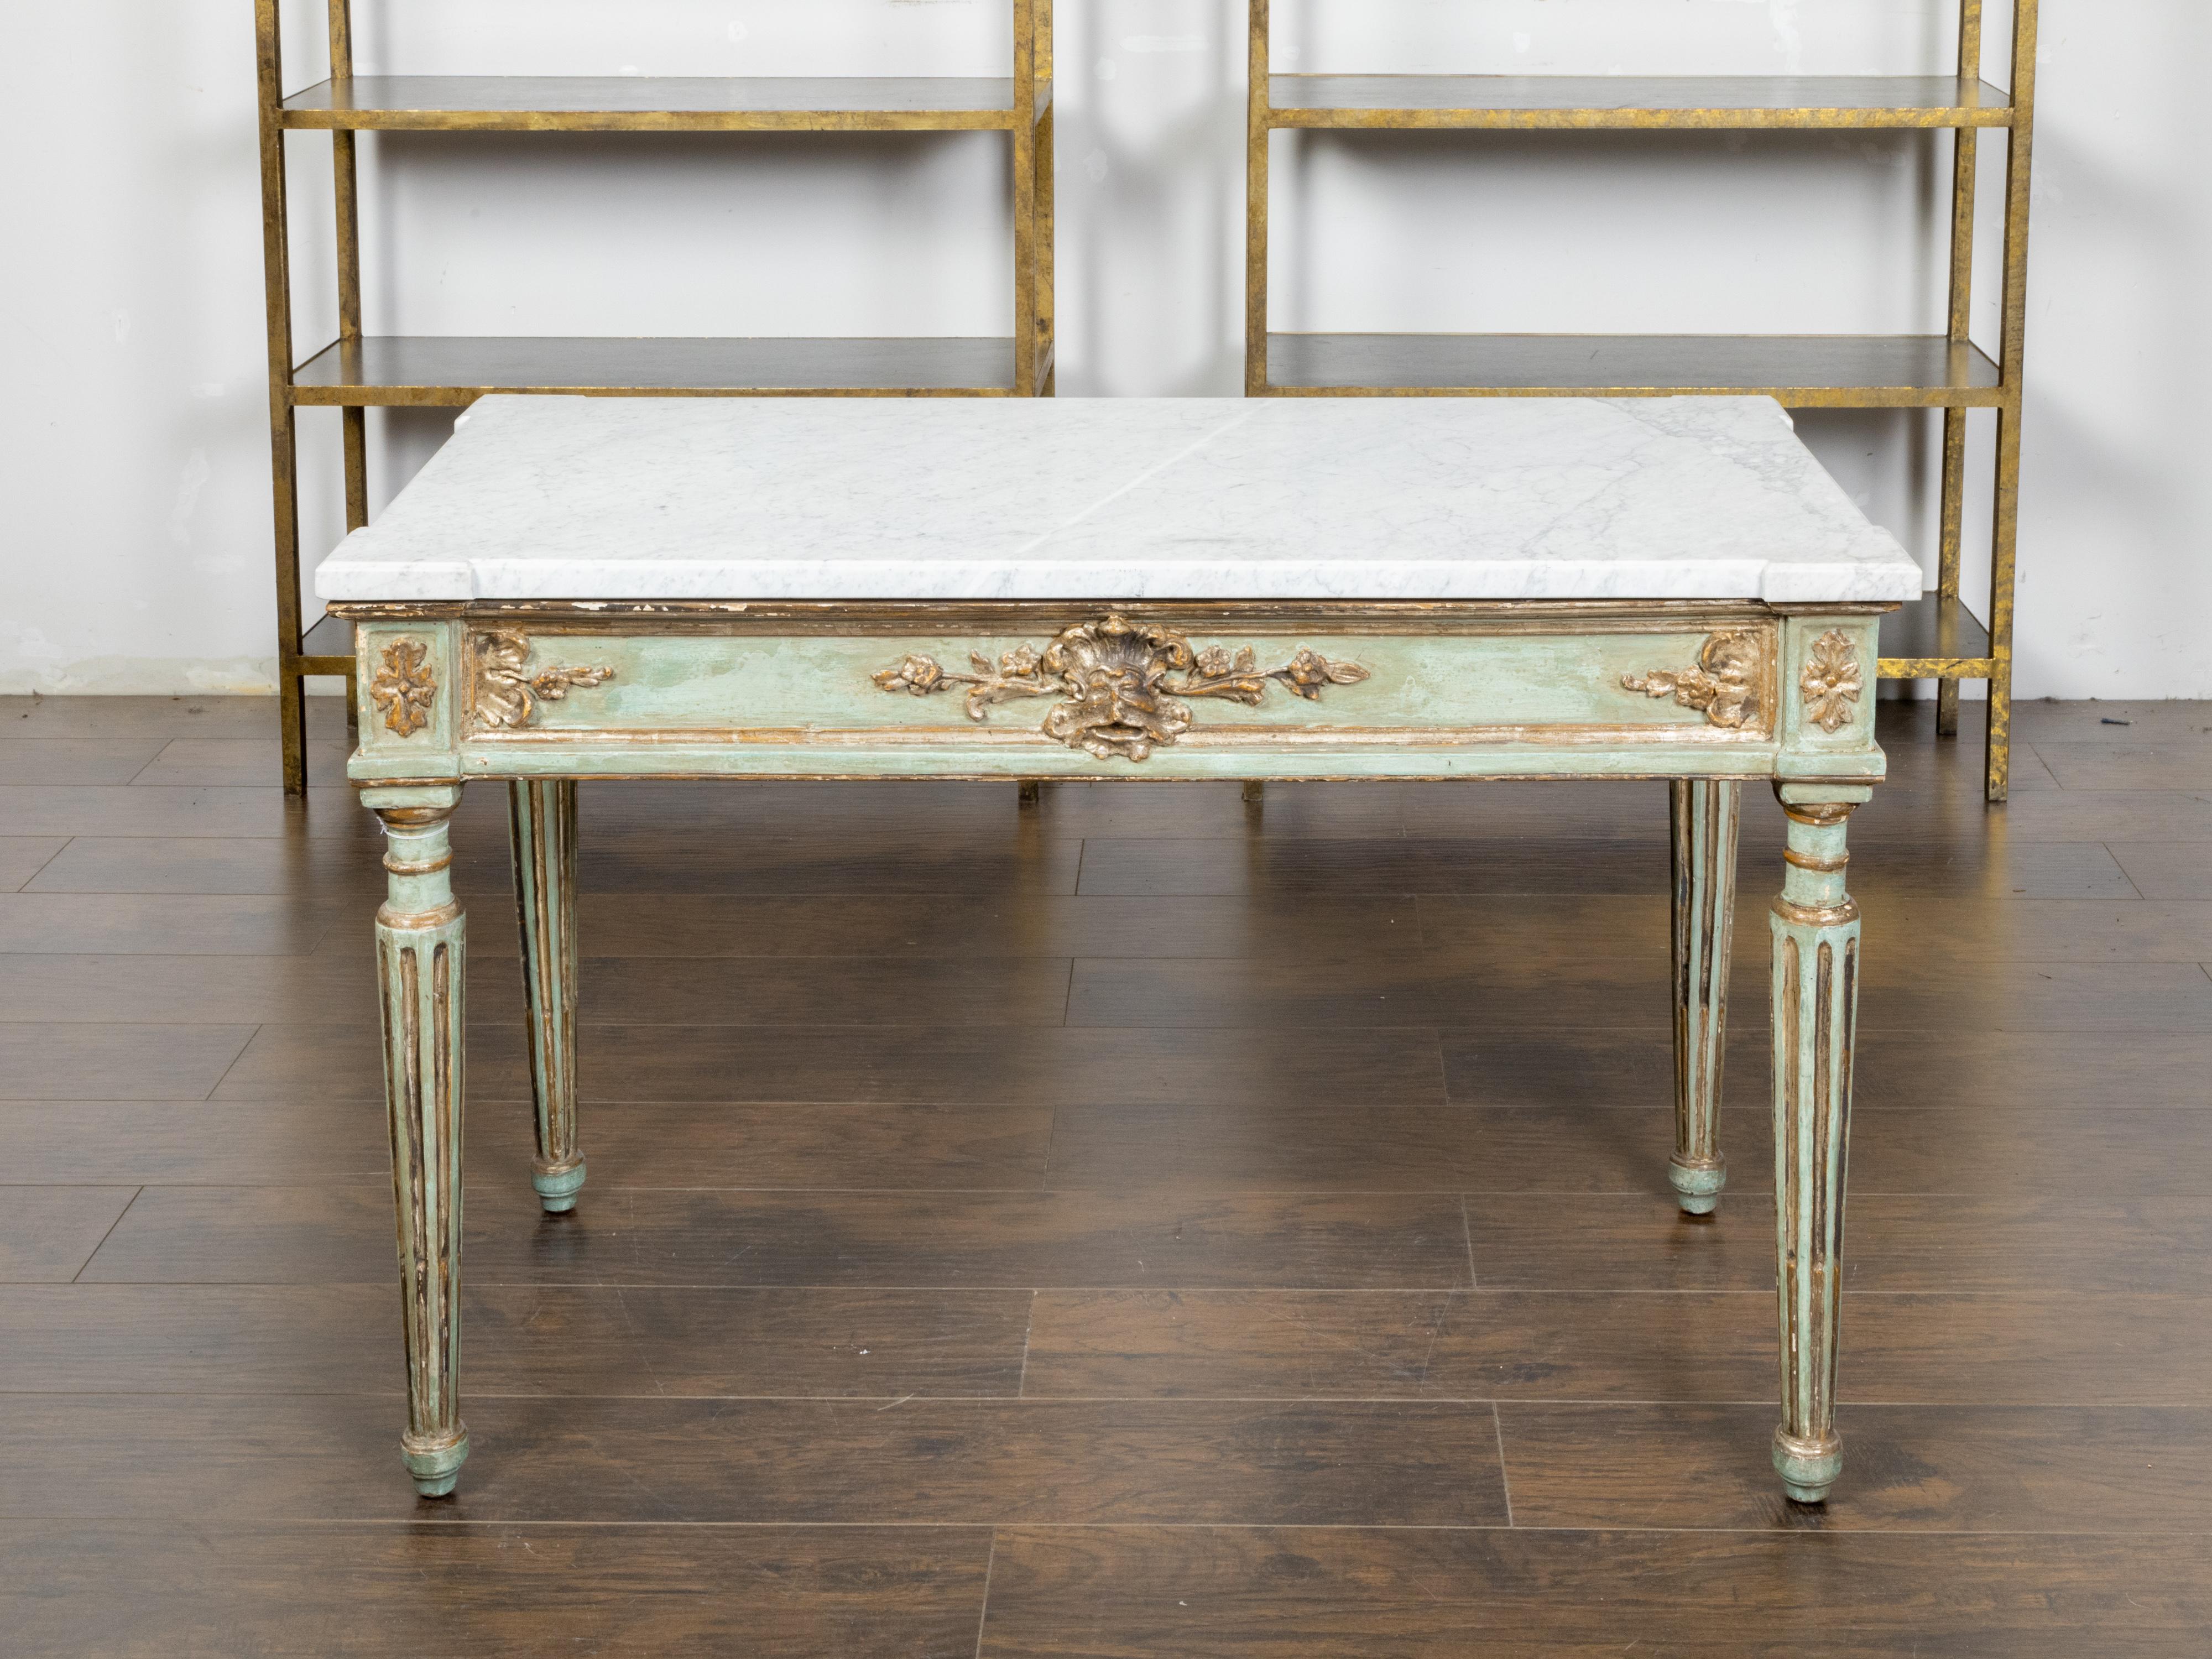 An Italian Neoclassical style painted wood console table from the 19th century, with white marble top, gilt and carved foliage, shells, mascaron faces and fluted legs. Created in Italy during the 19th century, this Neoclassical style painted console